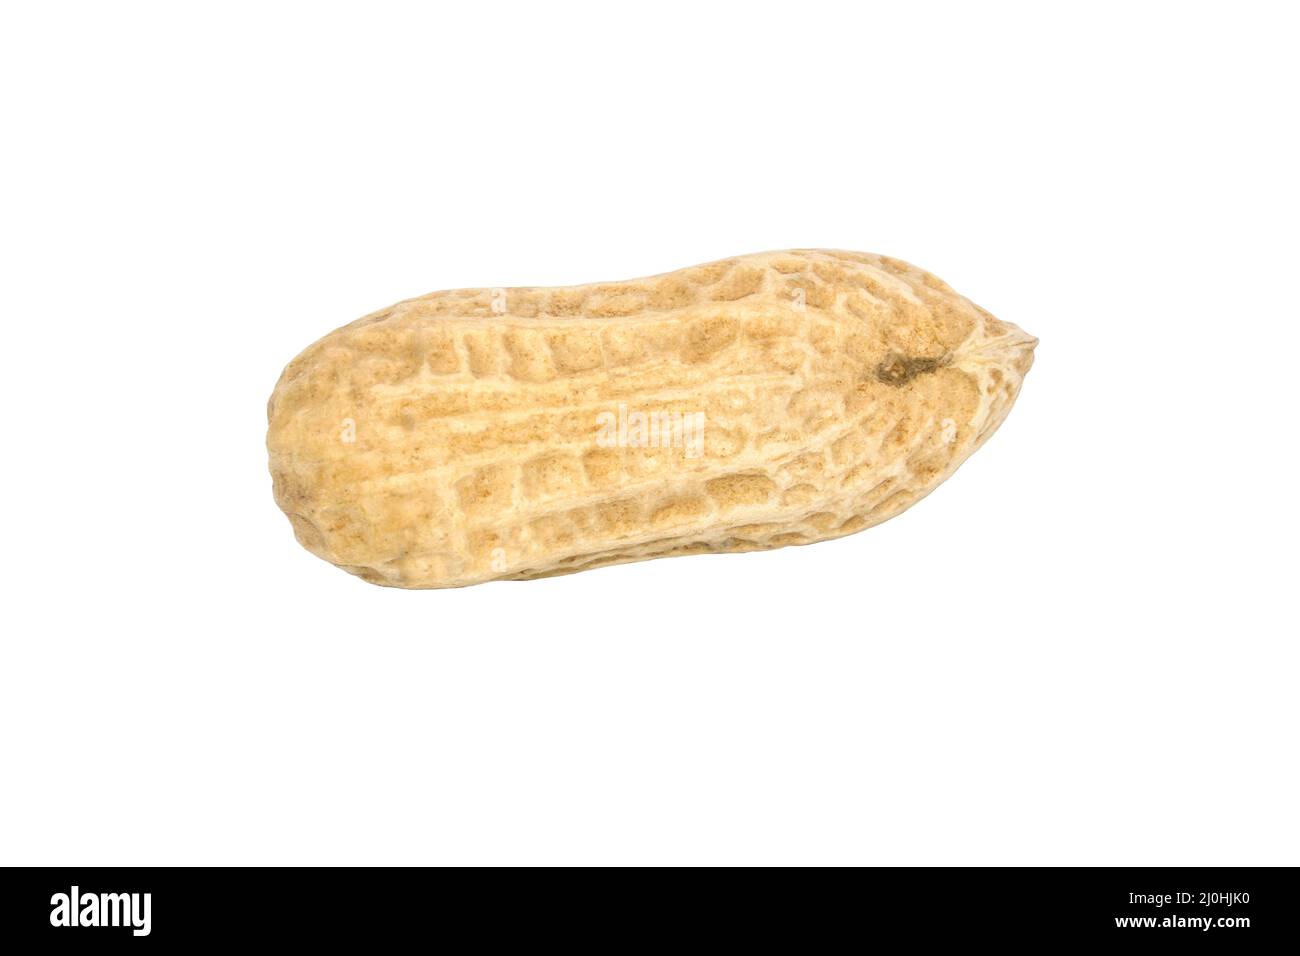 Dry nut with peel isolated on white background Stock Photo